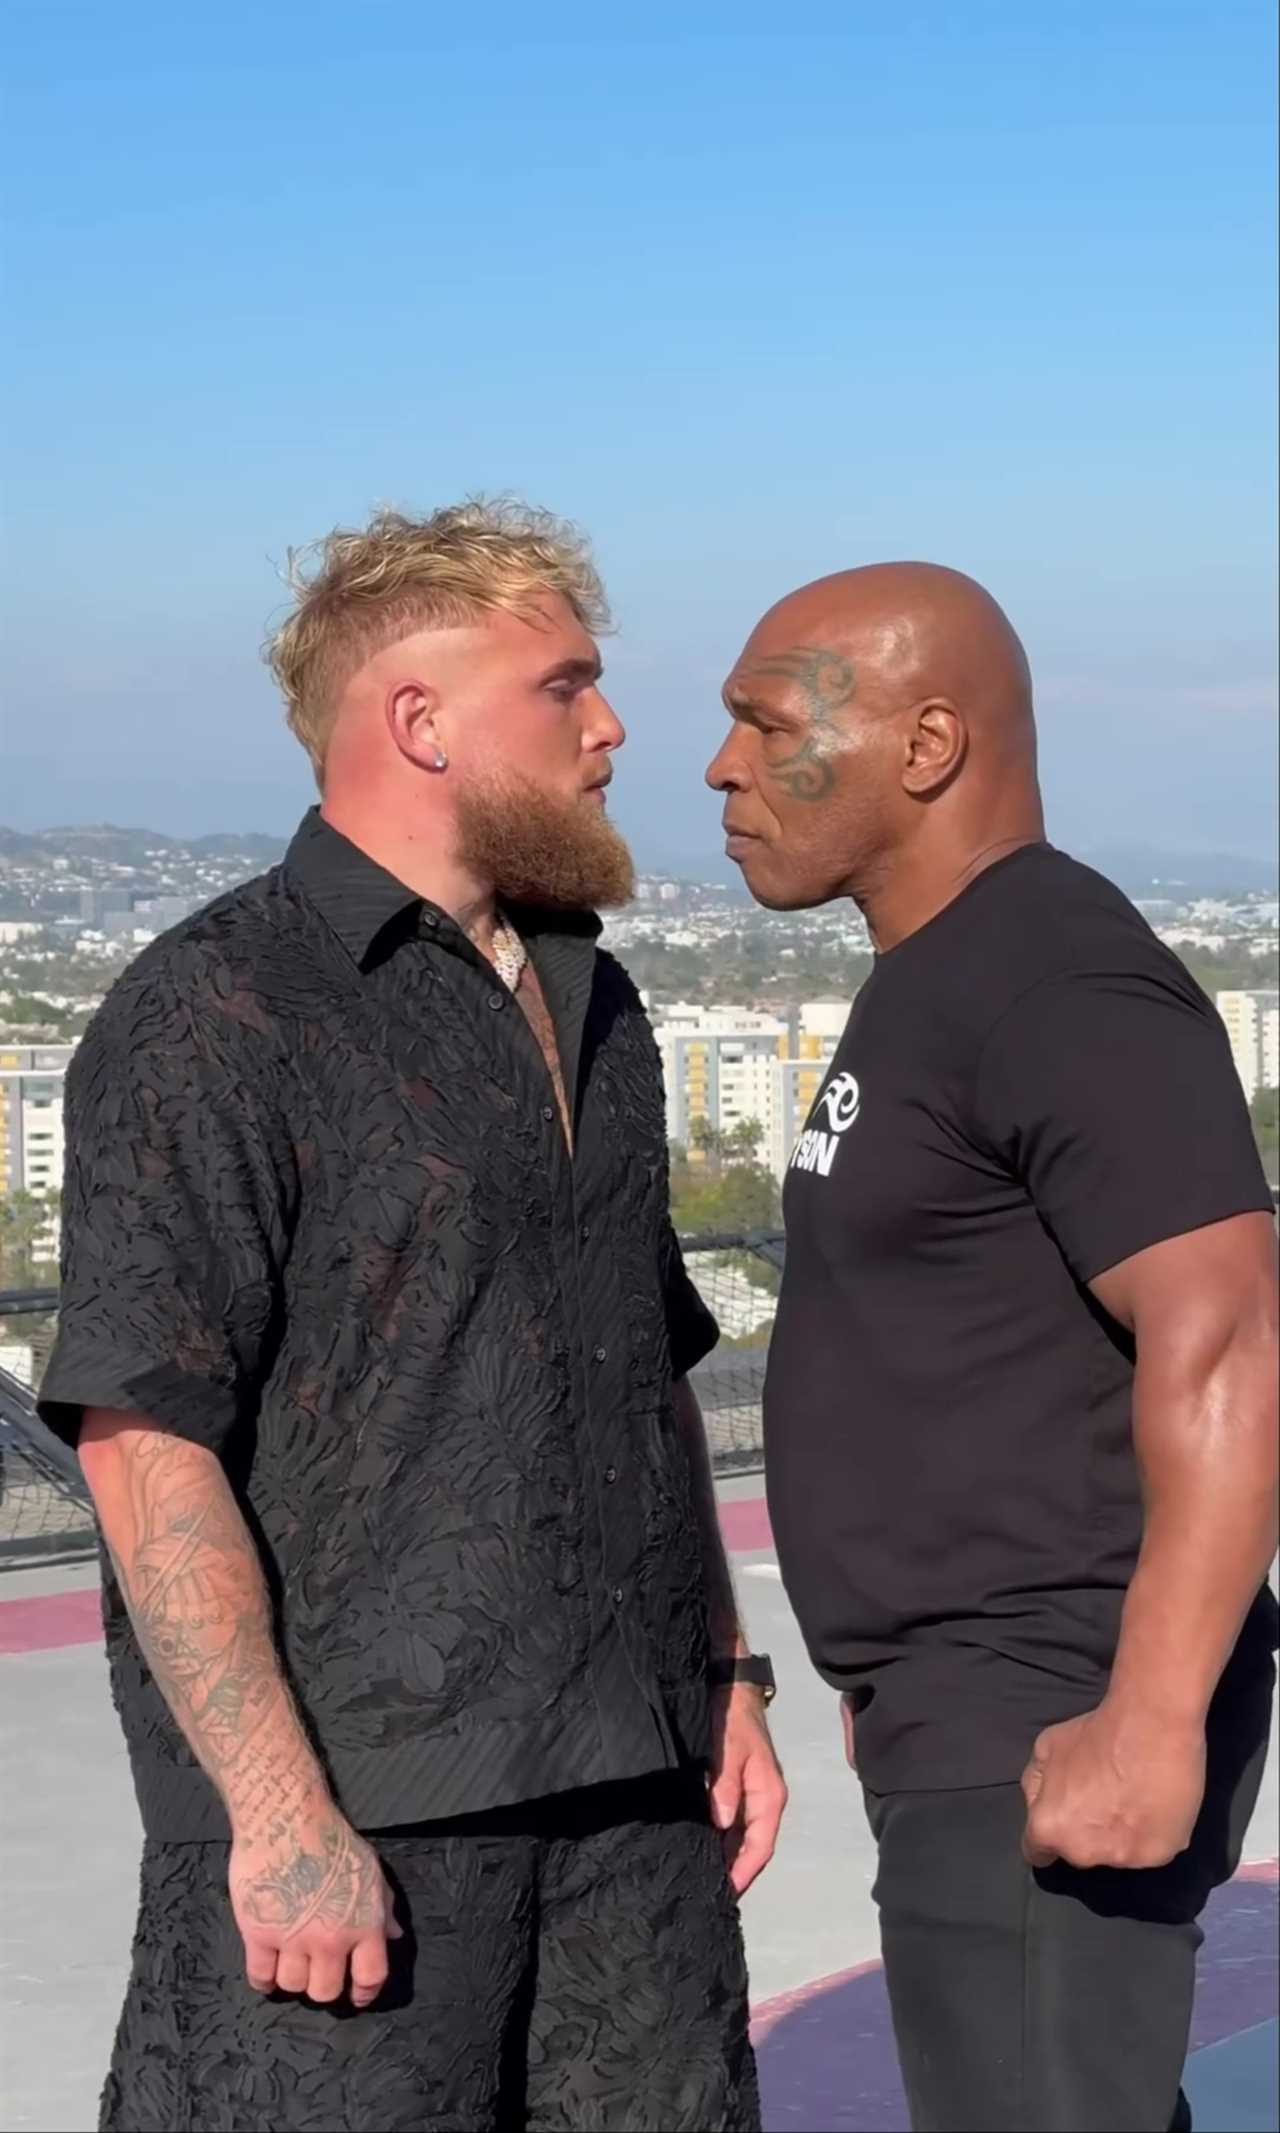 If he dies ...' Concerns expressed over Mike Tyson (57) ahead of his pro-boxing match against Jake Paul (27).